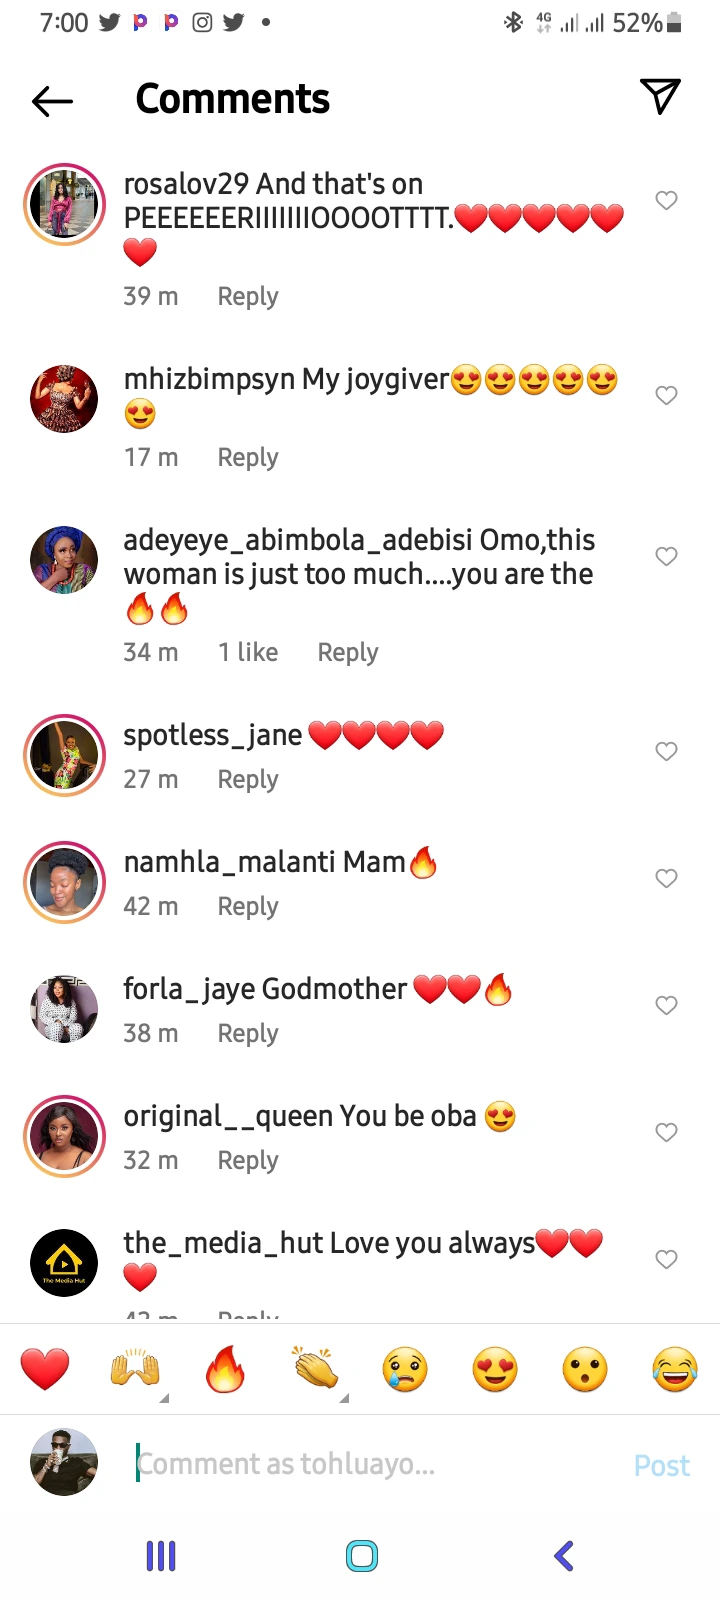 instagram - Reactions As Celebrity Stylist, Toyin Lawani Shares Stunning Photos On Instagram (PHOTOS) E389adc45b2d4dd4af094ae230277cc7?quality=uhq&format=webp&resize=720